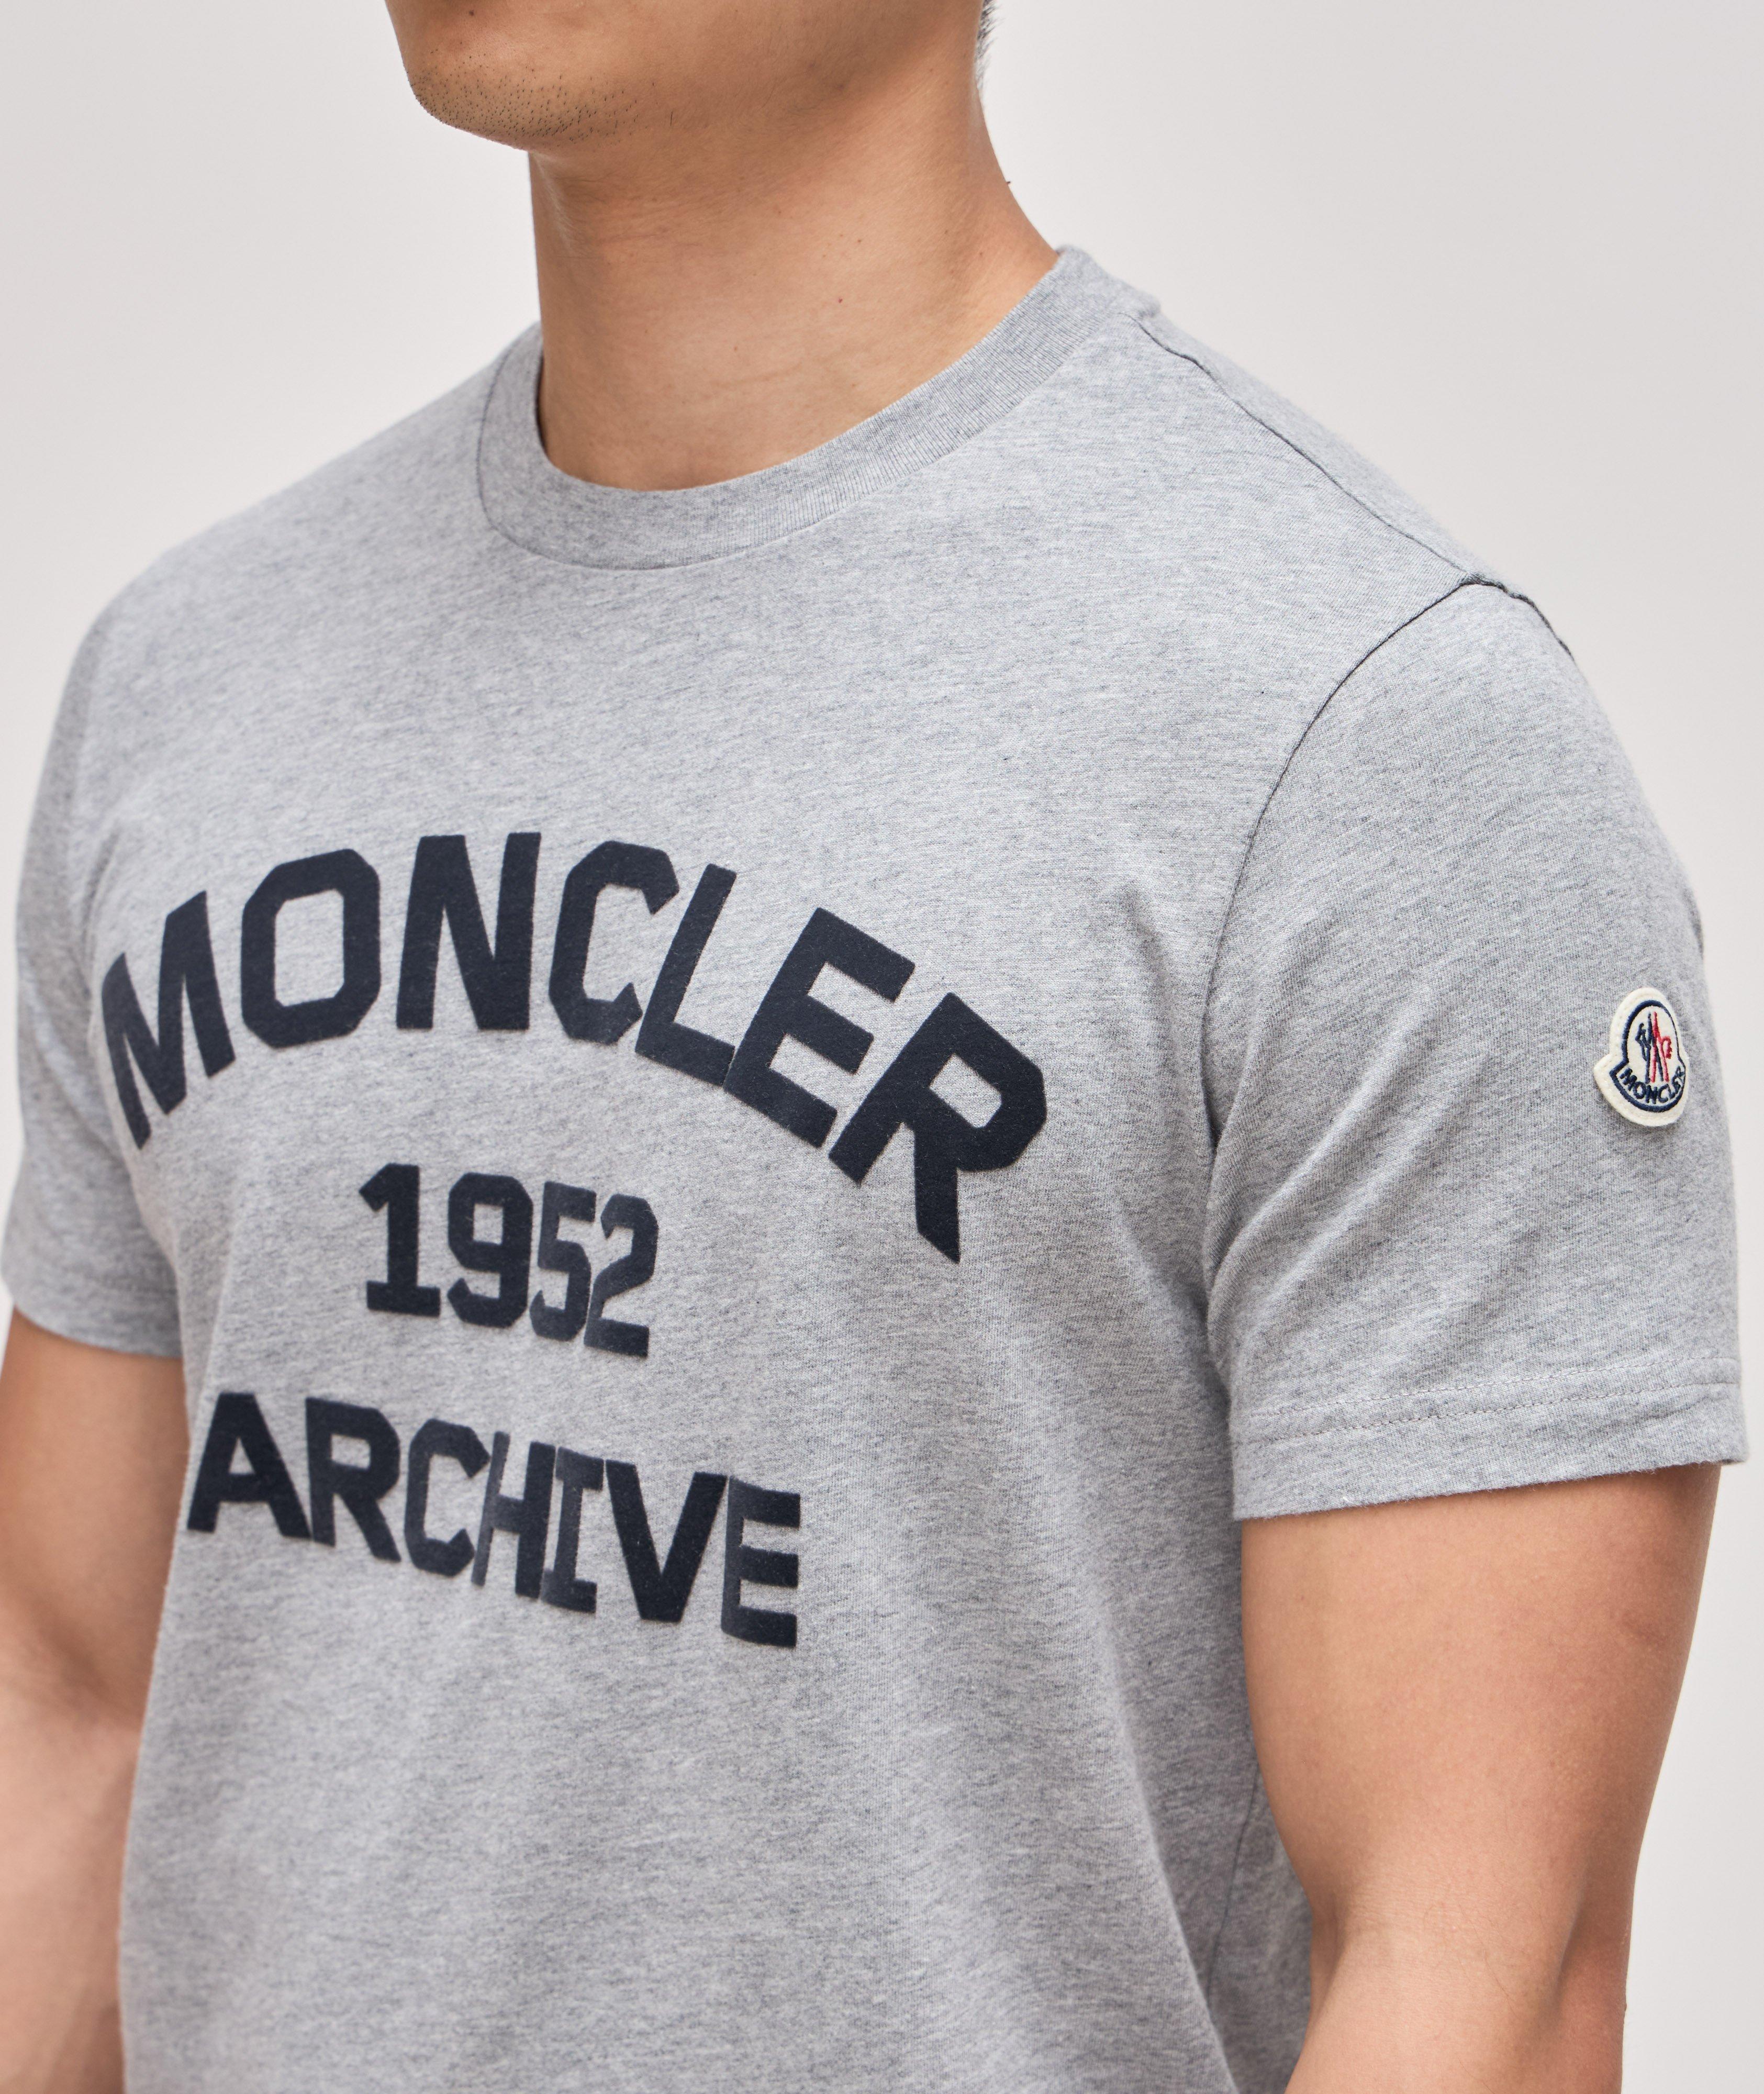 T-shirt, collection d’archives image 3